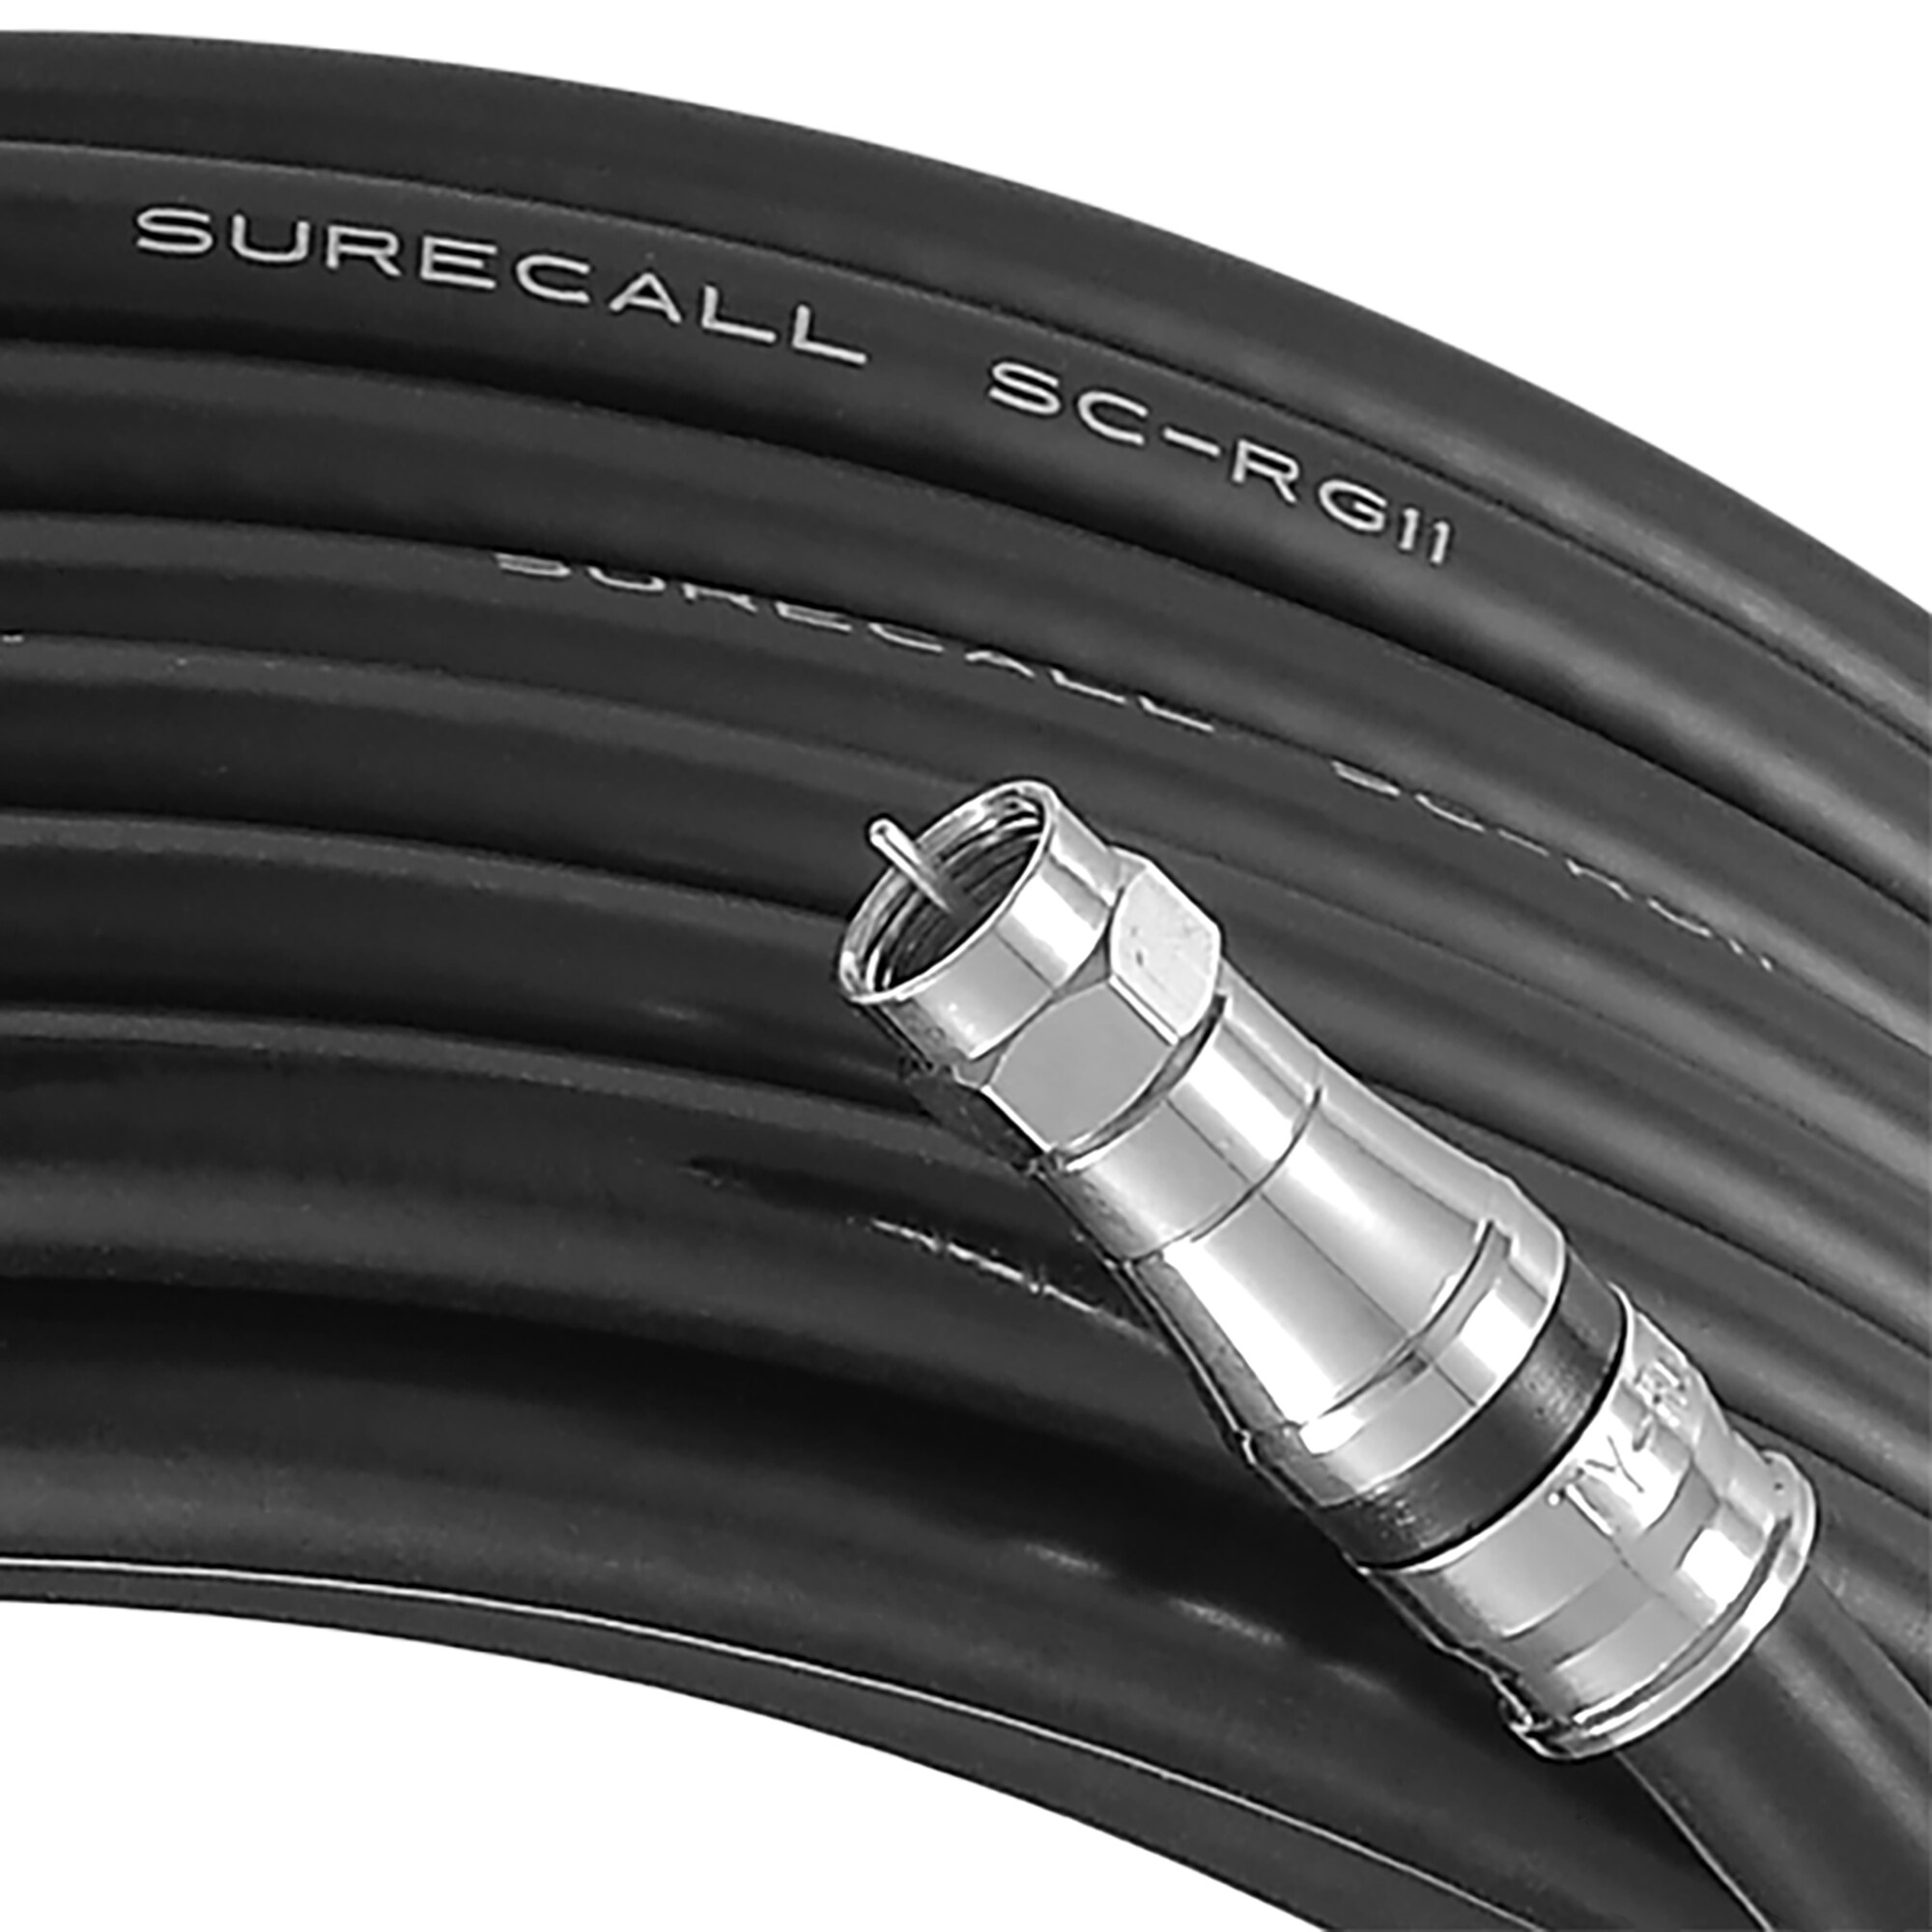  SWANLAKE 11 Fiberglass Running Wire Cable Coaxial